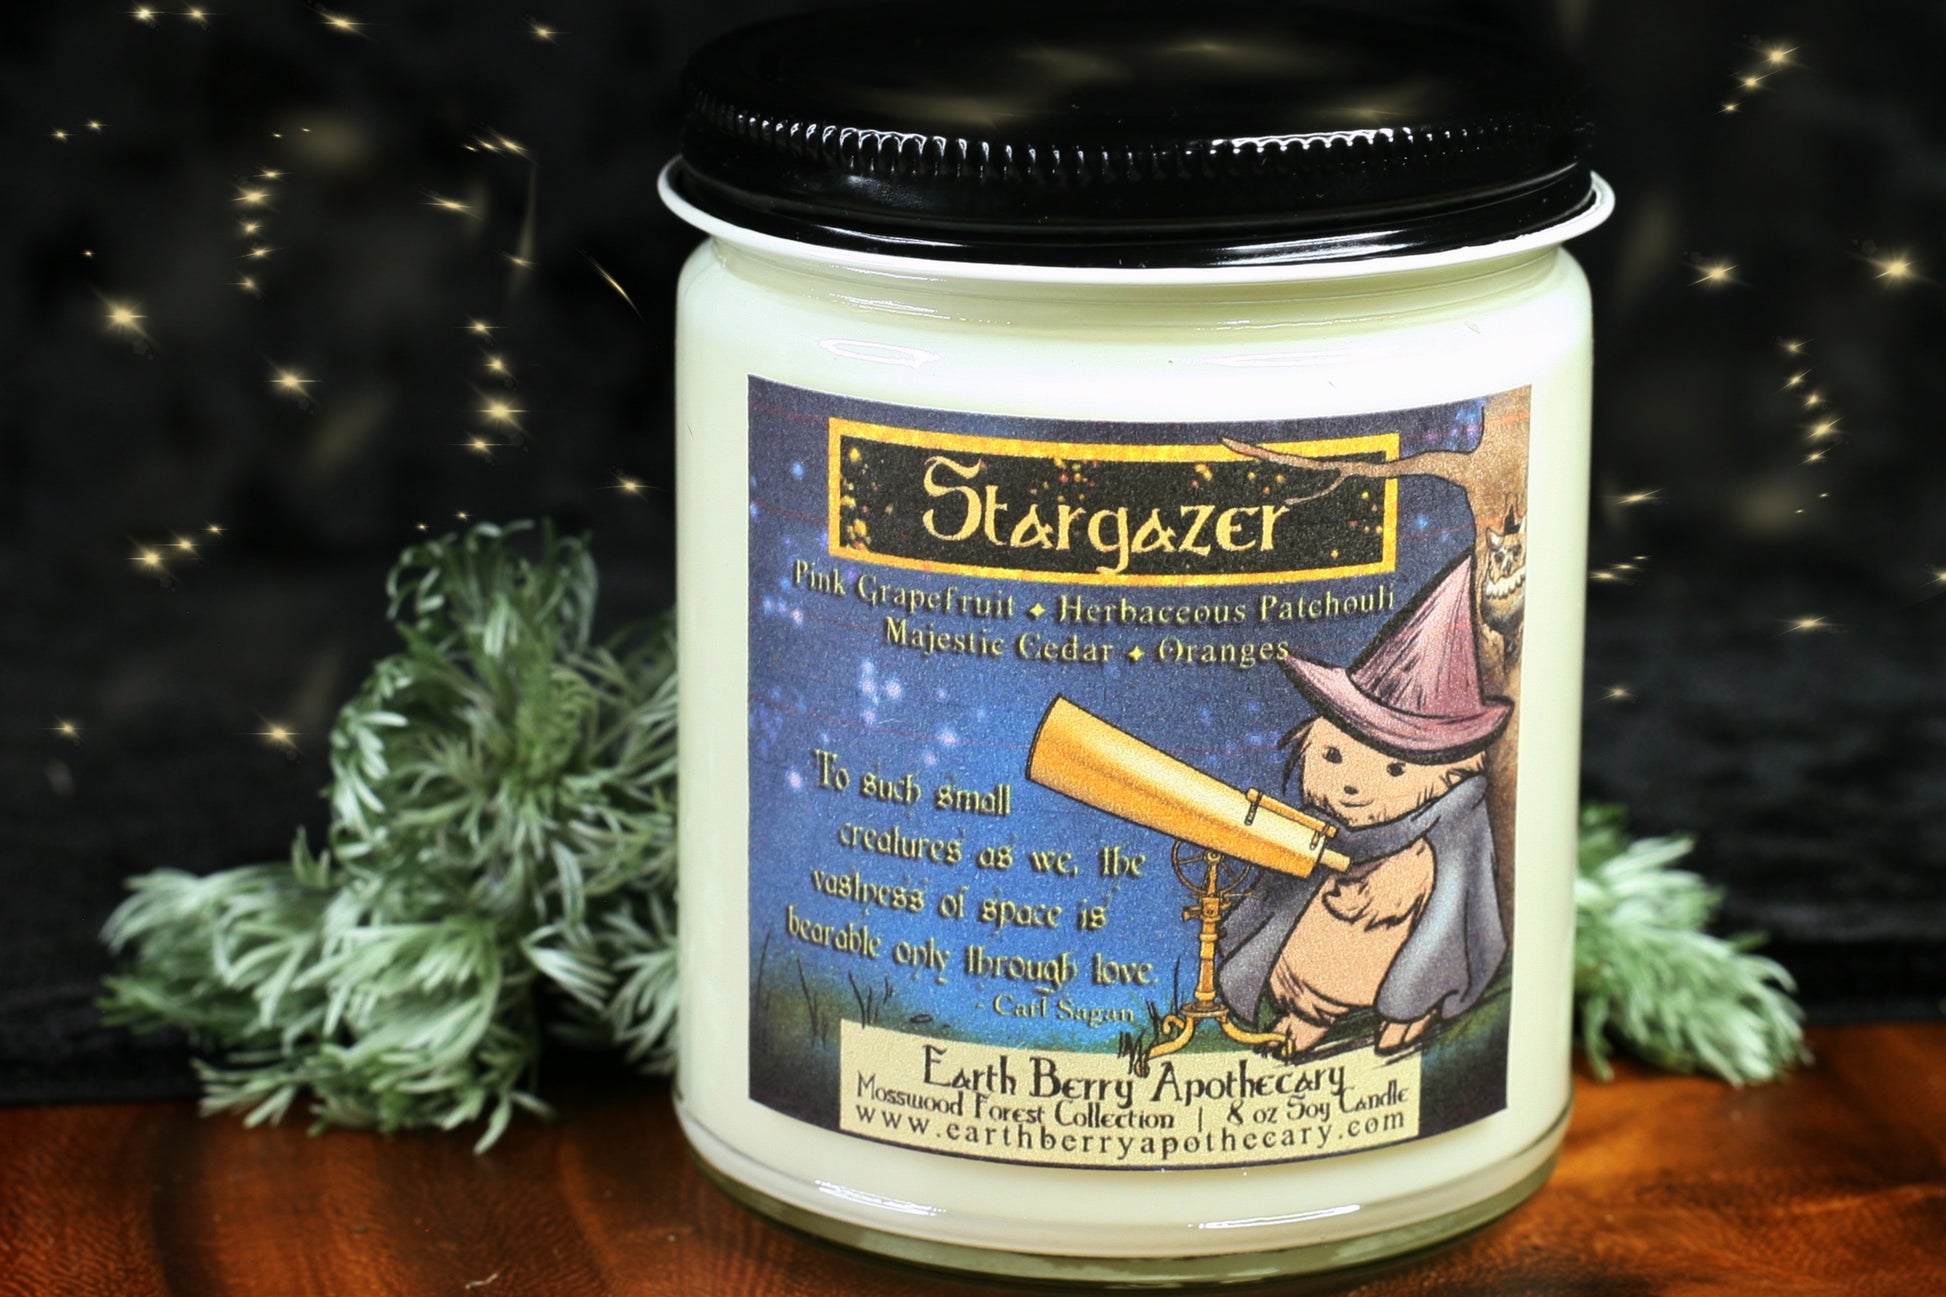 Stargazer soy candle with the hedge witch using an old fashioned telescope. Scented in grapefruit and patchouli, this candle is set in an earthy, forest scene with glowing stars.